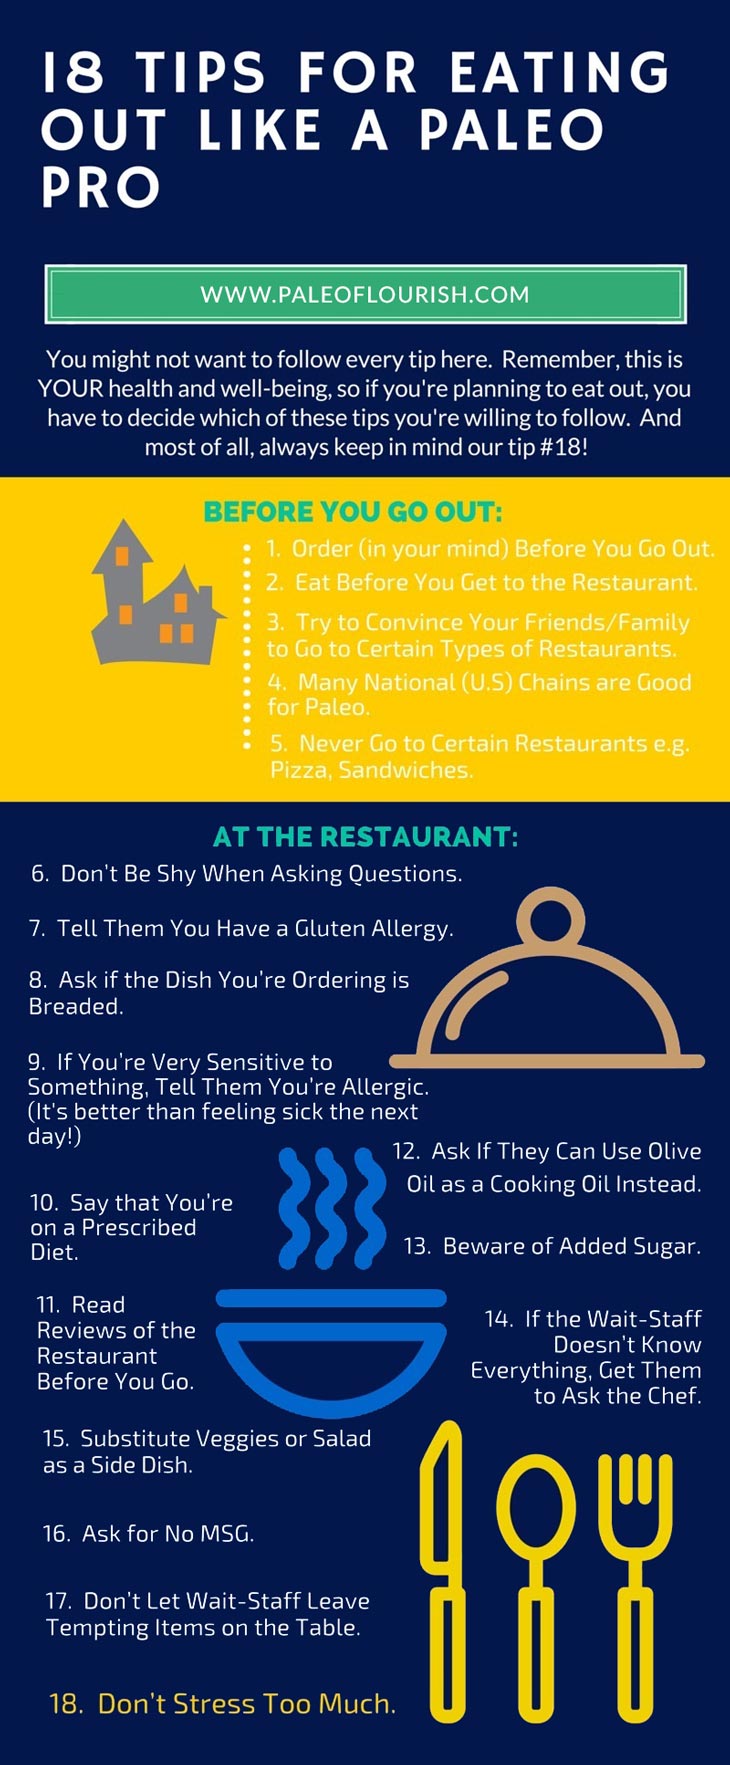 18 Tips for Eating Out Like a Paleo Pro -  https://paleoflourish.com/eating-out-like-a-paleo-pro